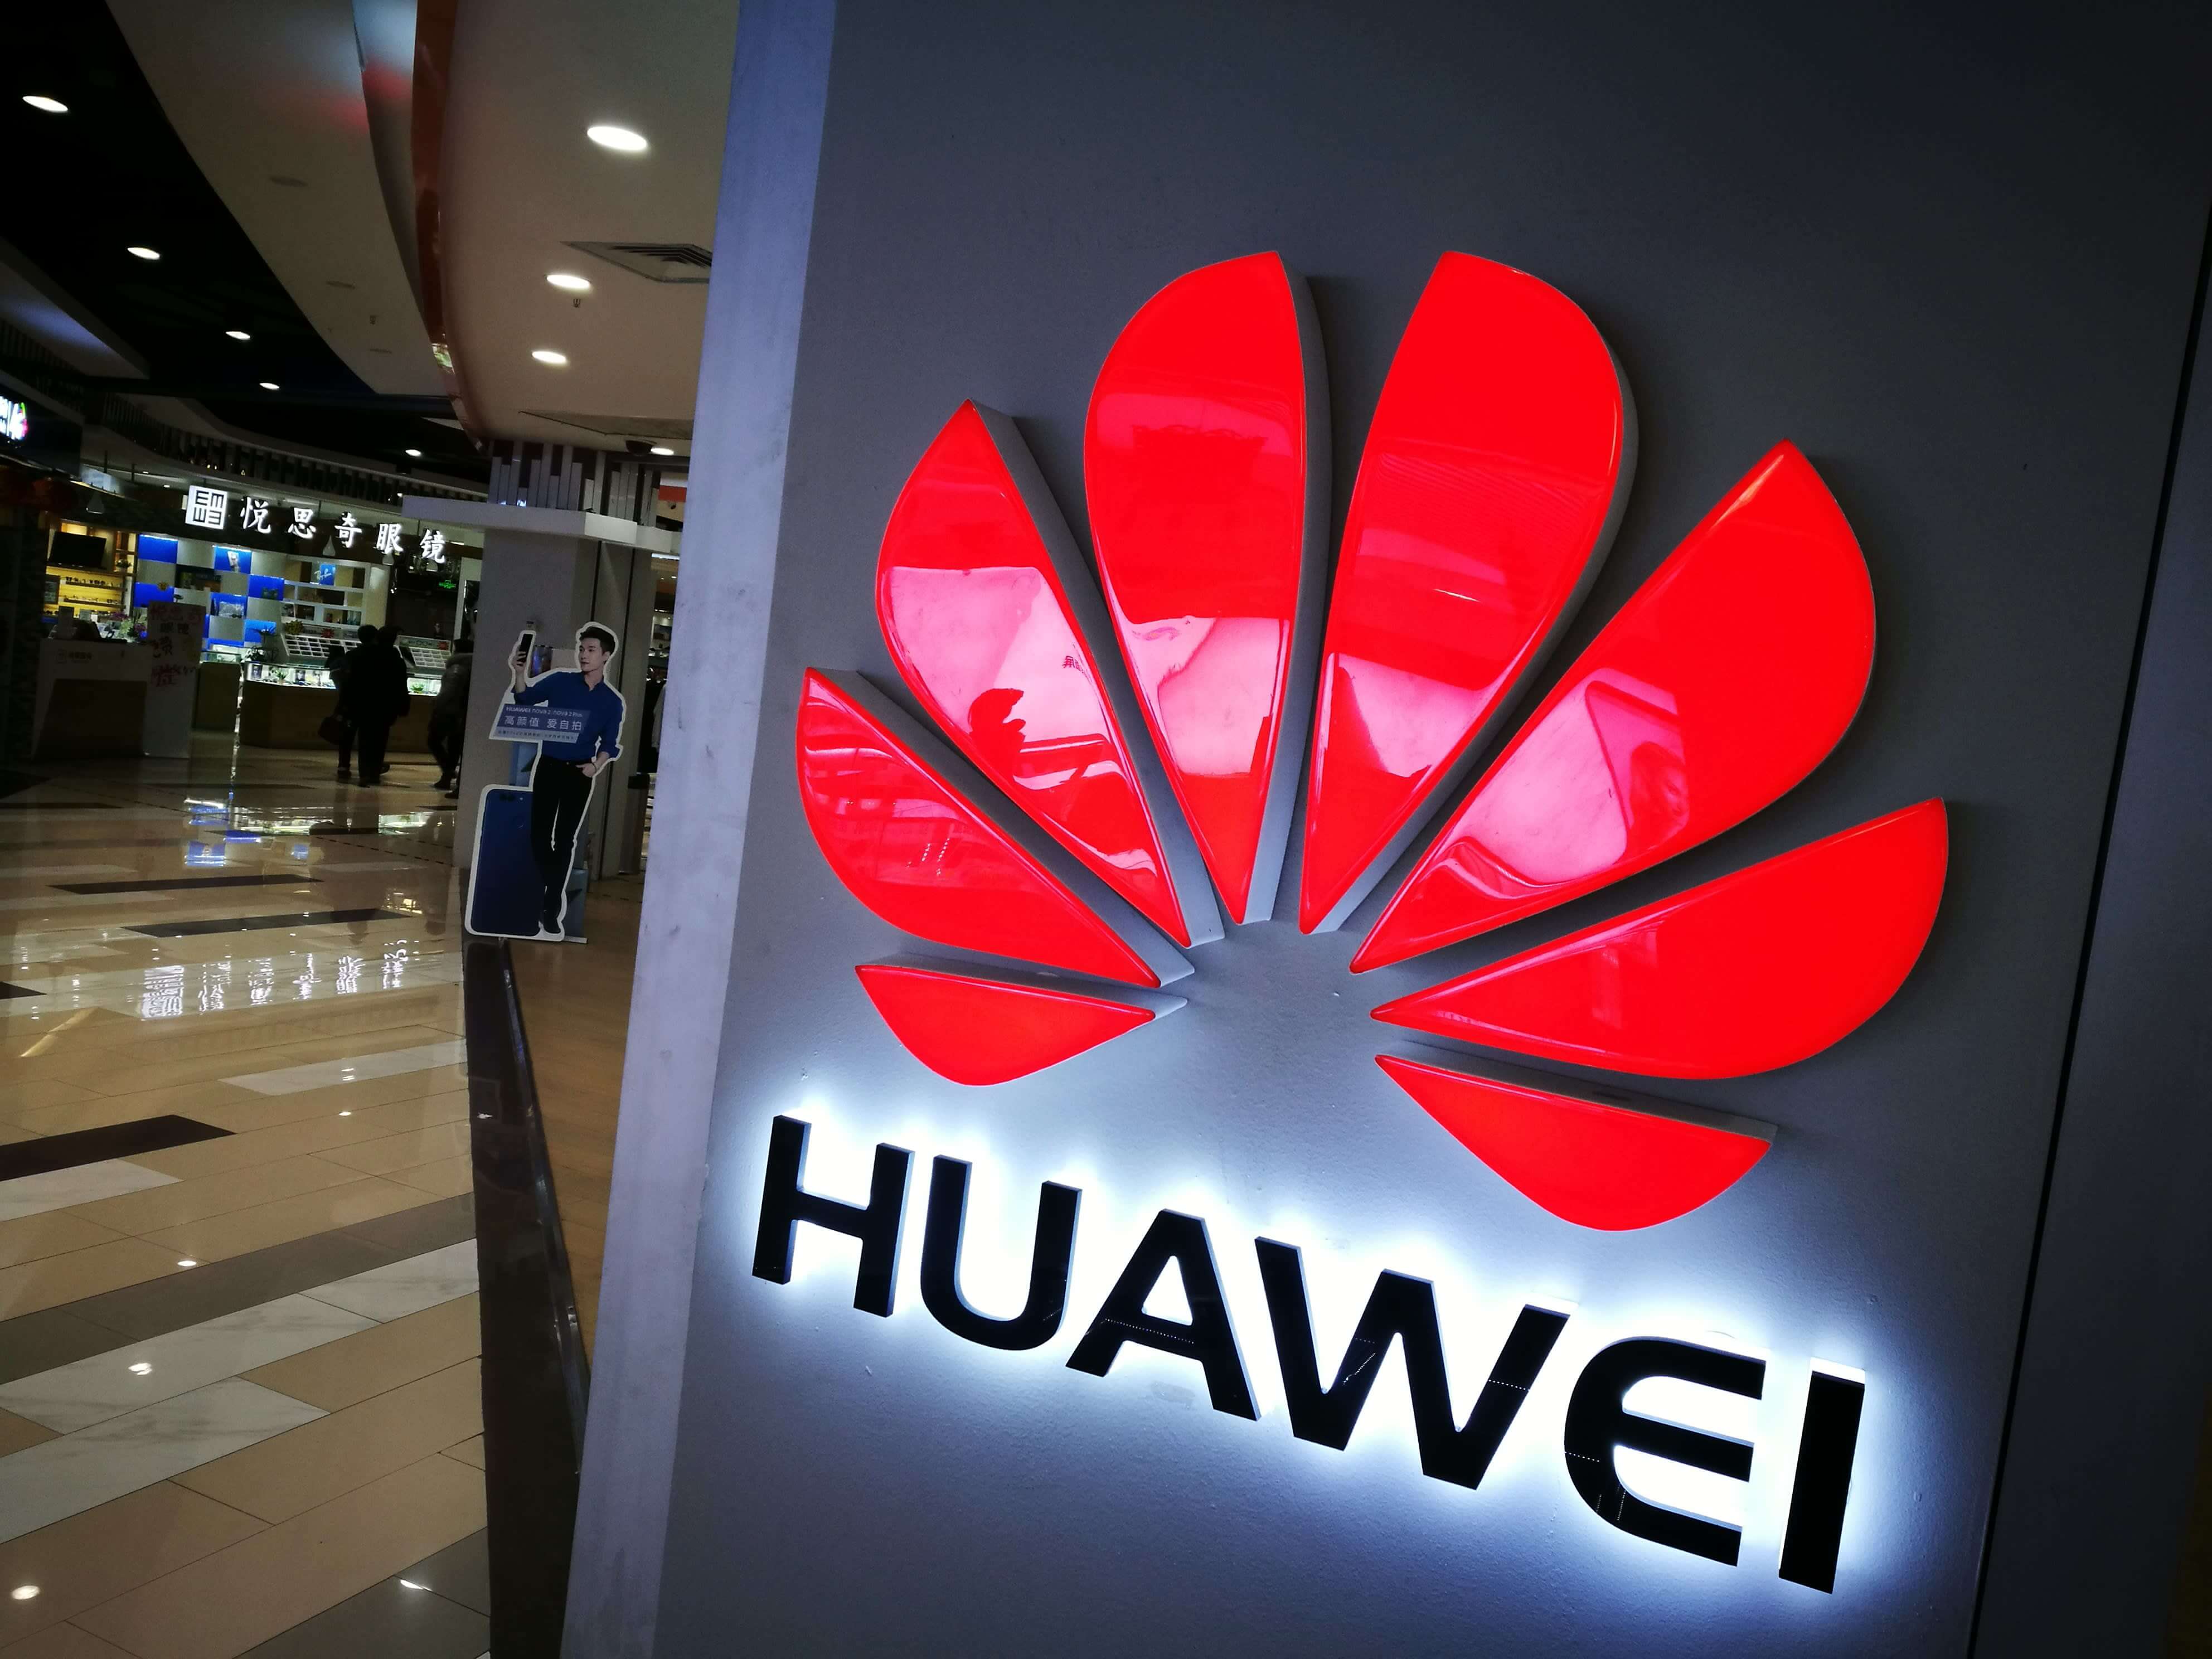 Huawei will reportedly sue the FCC over new restrictions